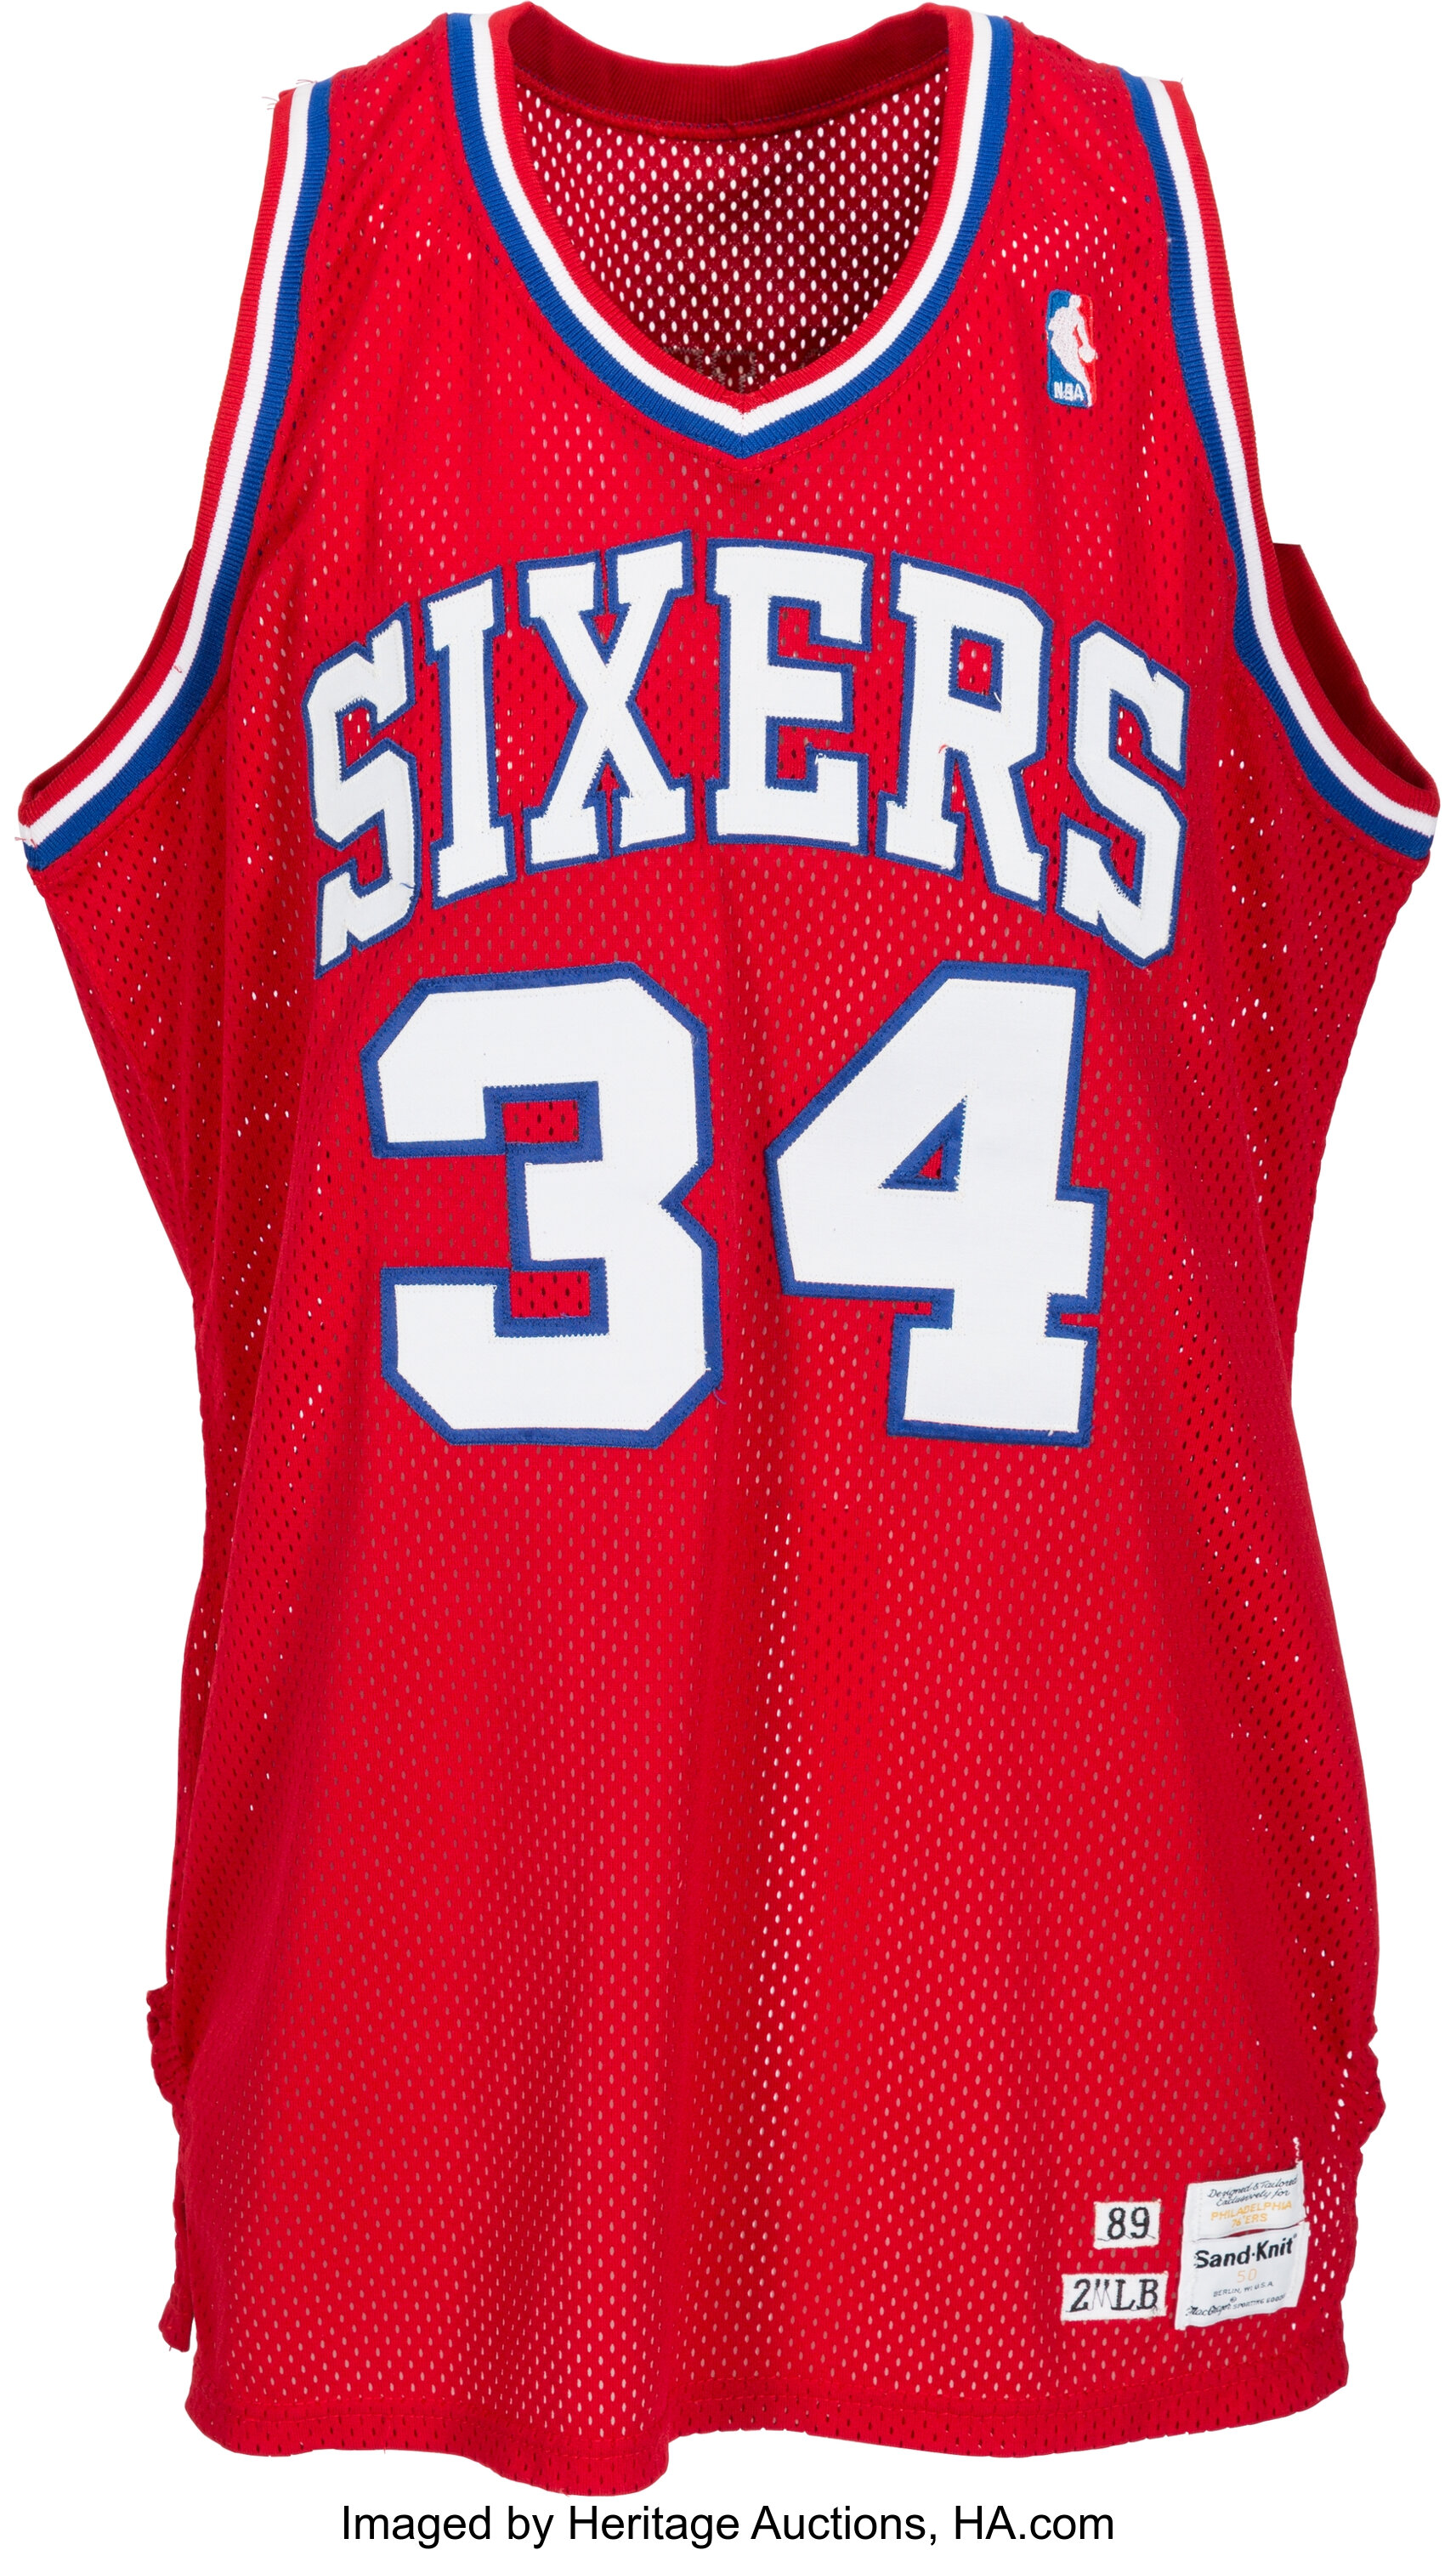 NBA HOFer Charles Barkley Had His Sixers Jersey Retired 20 Years Ago Today